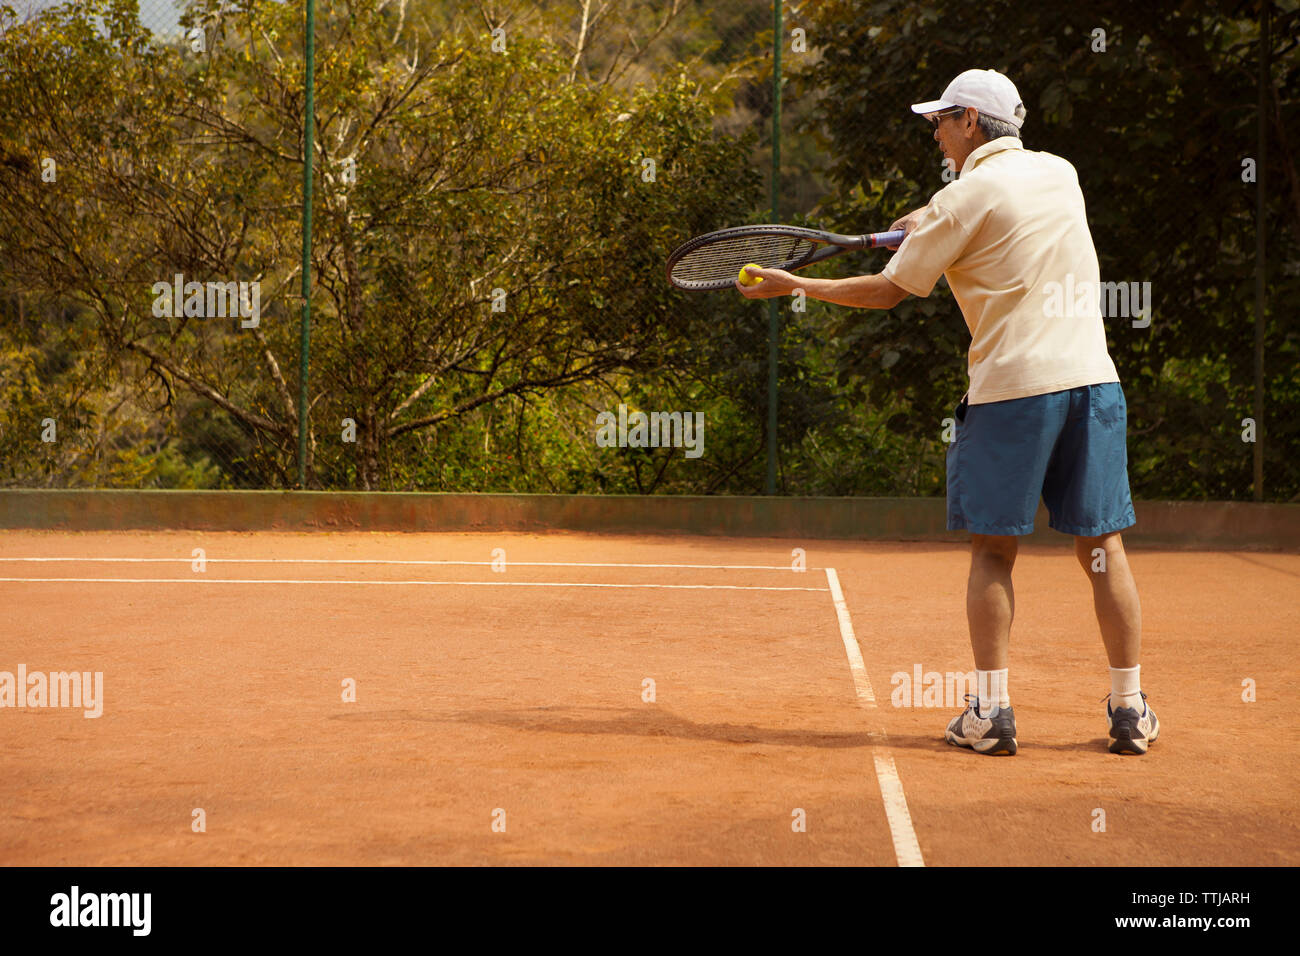 Rear view of man playing tennis at court Stock Photo